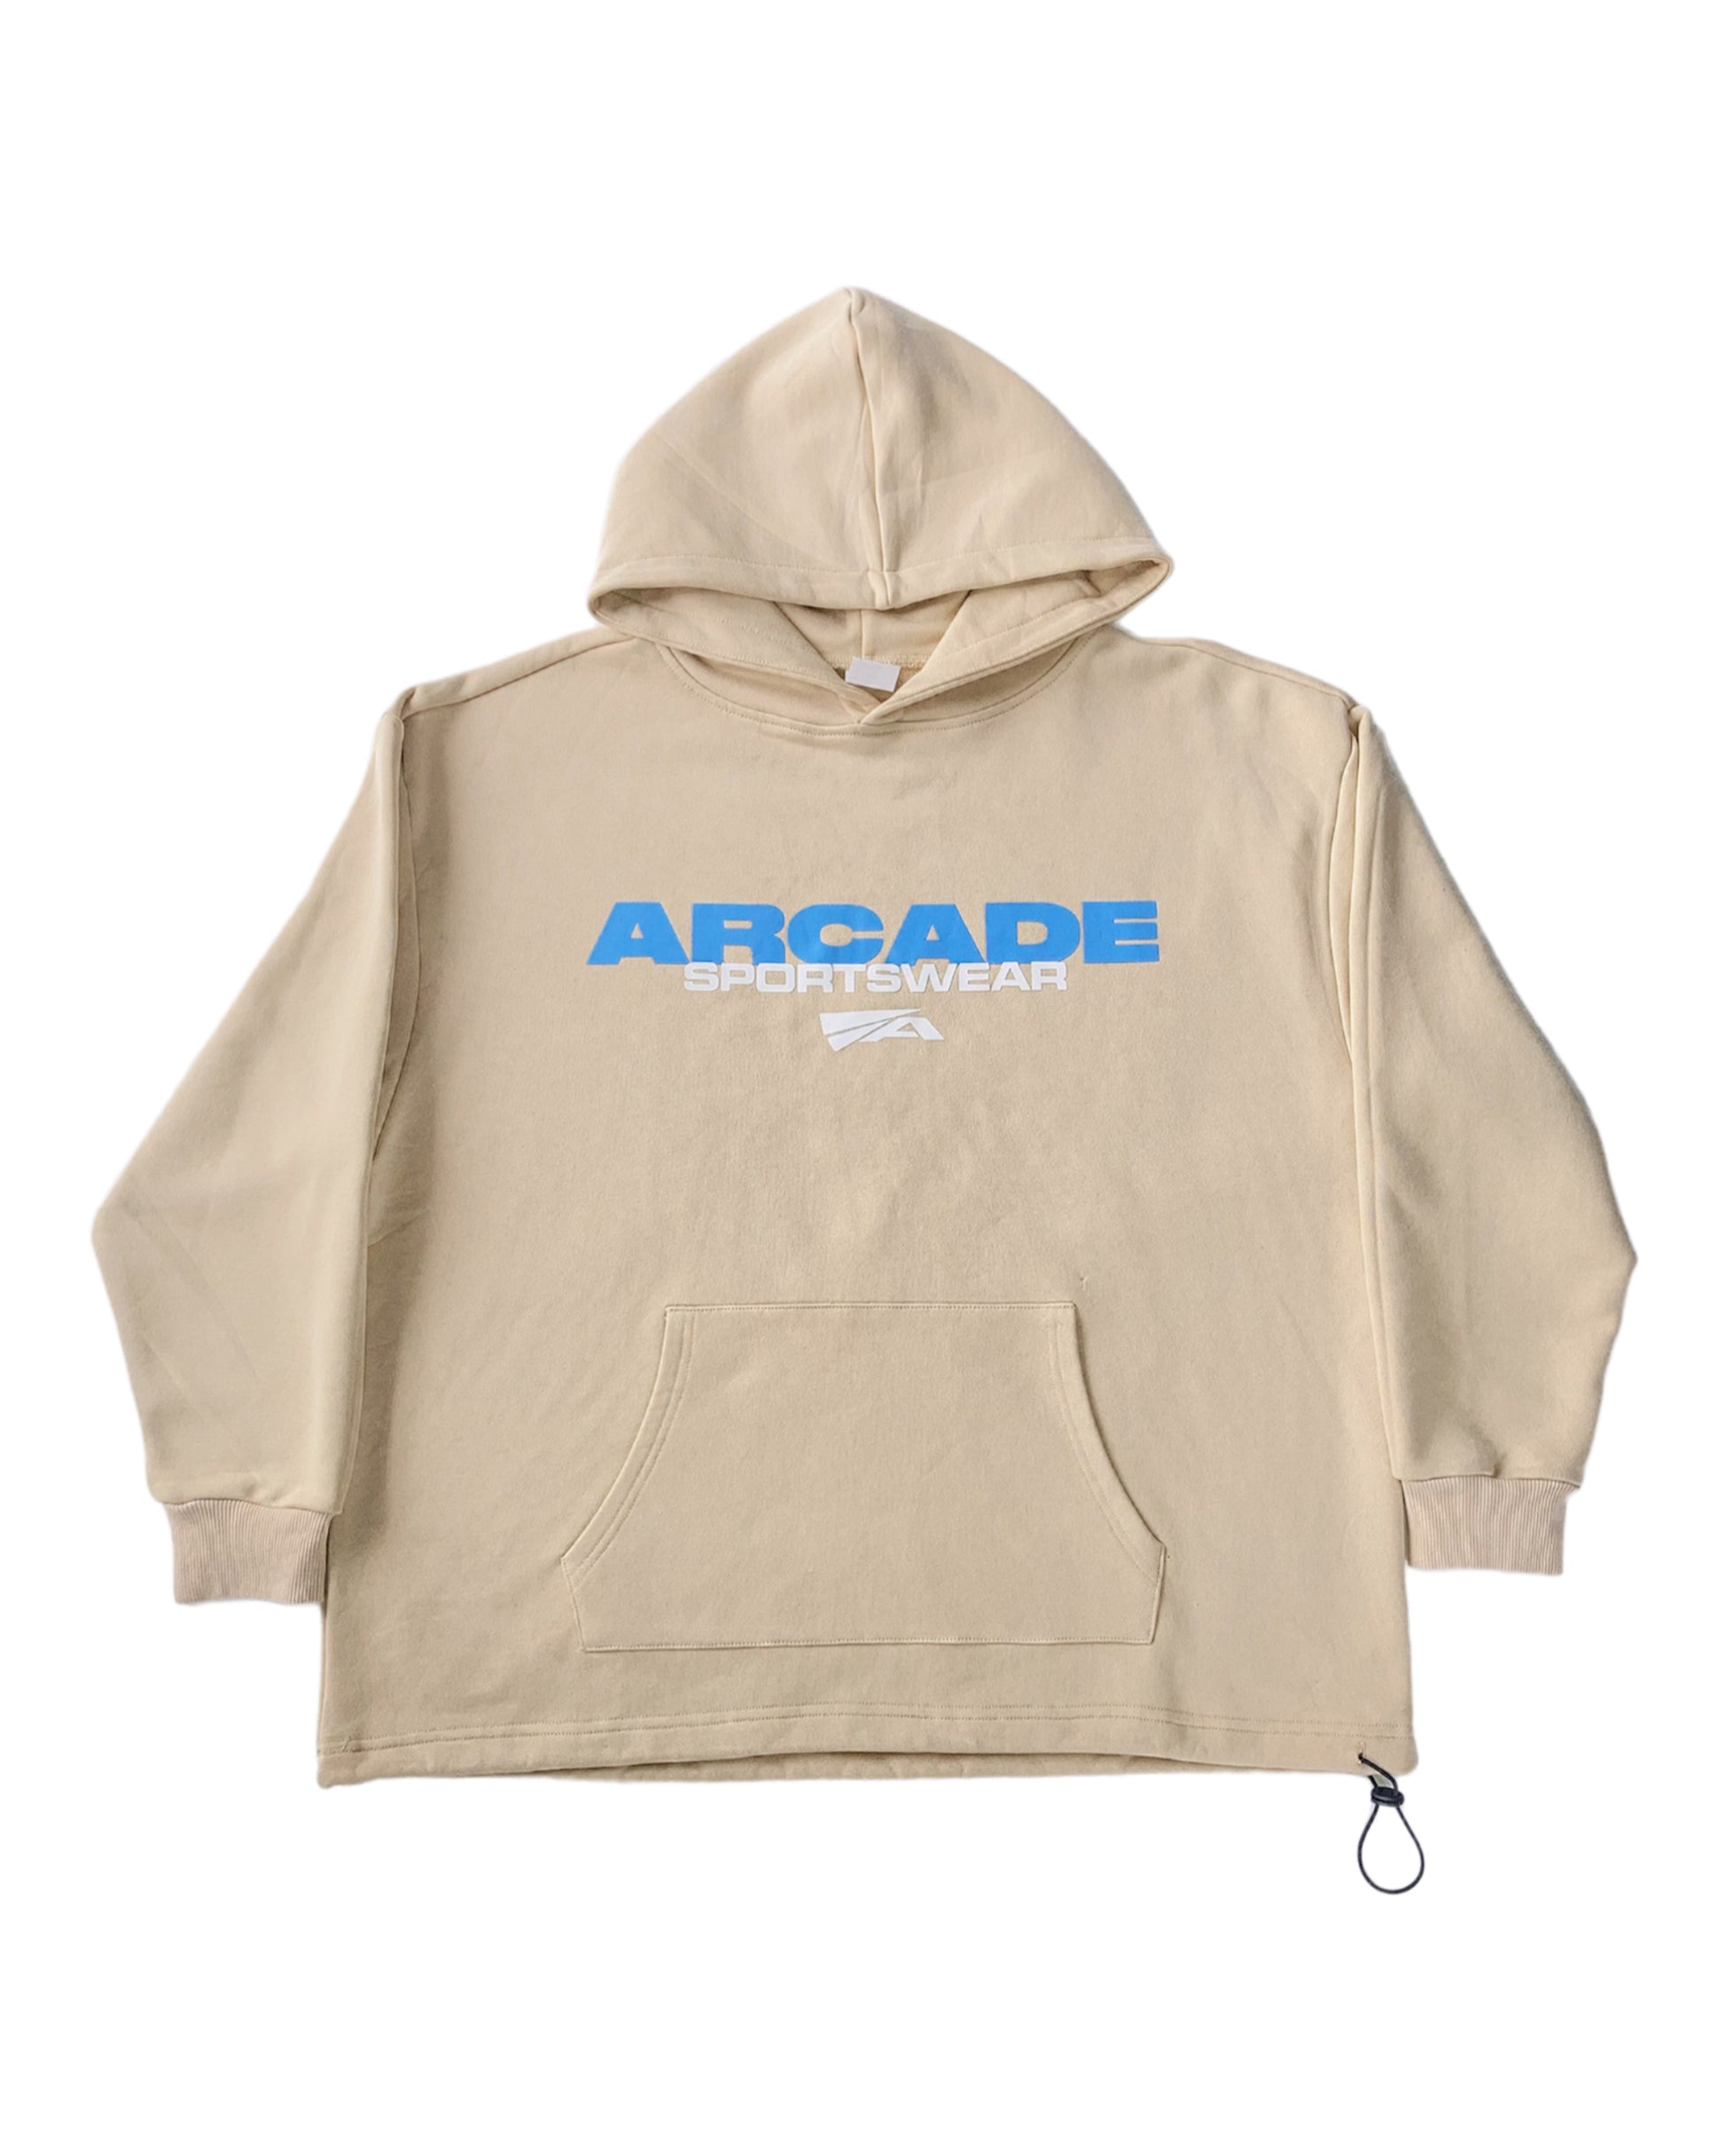 Arcade Sportswear Hoodie Tan   Features:  Screen printed “Arcade Sportswear” Graphic w/ logo on chest  Heavyweight 420 GSM  100% French Terry Cotton  Oversized loose fit    Semi-cropped w/ drop shoulders  Adjustable cord lock on waist 